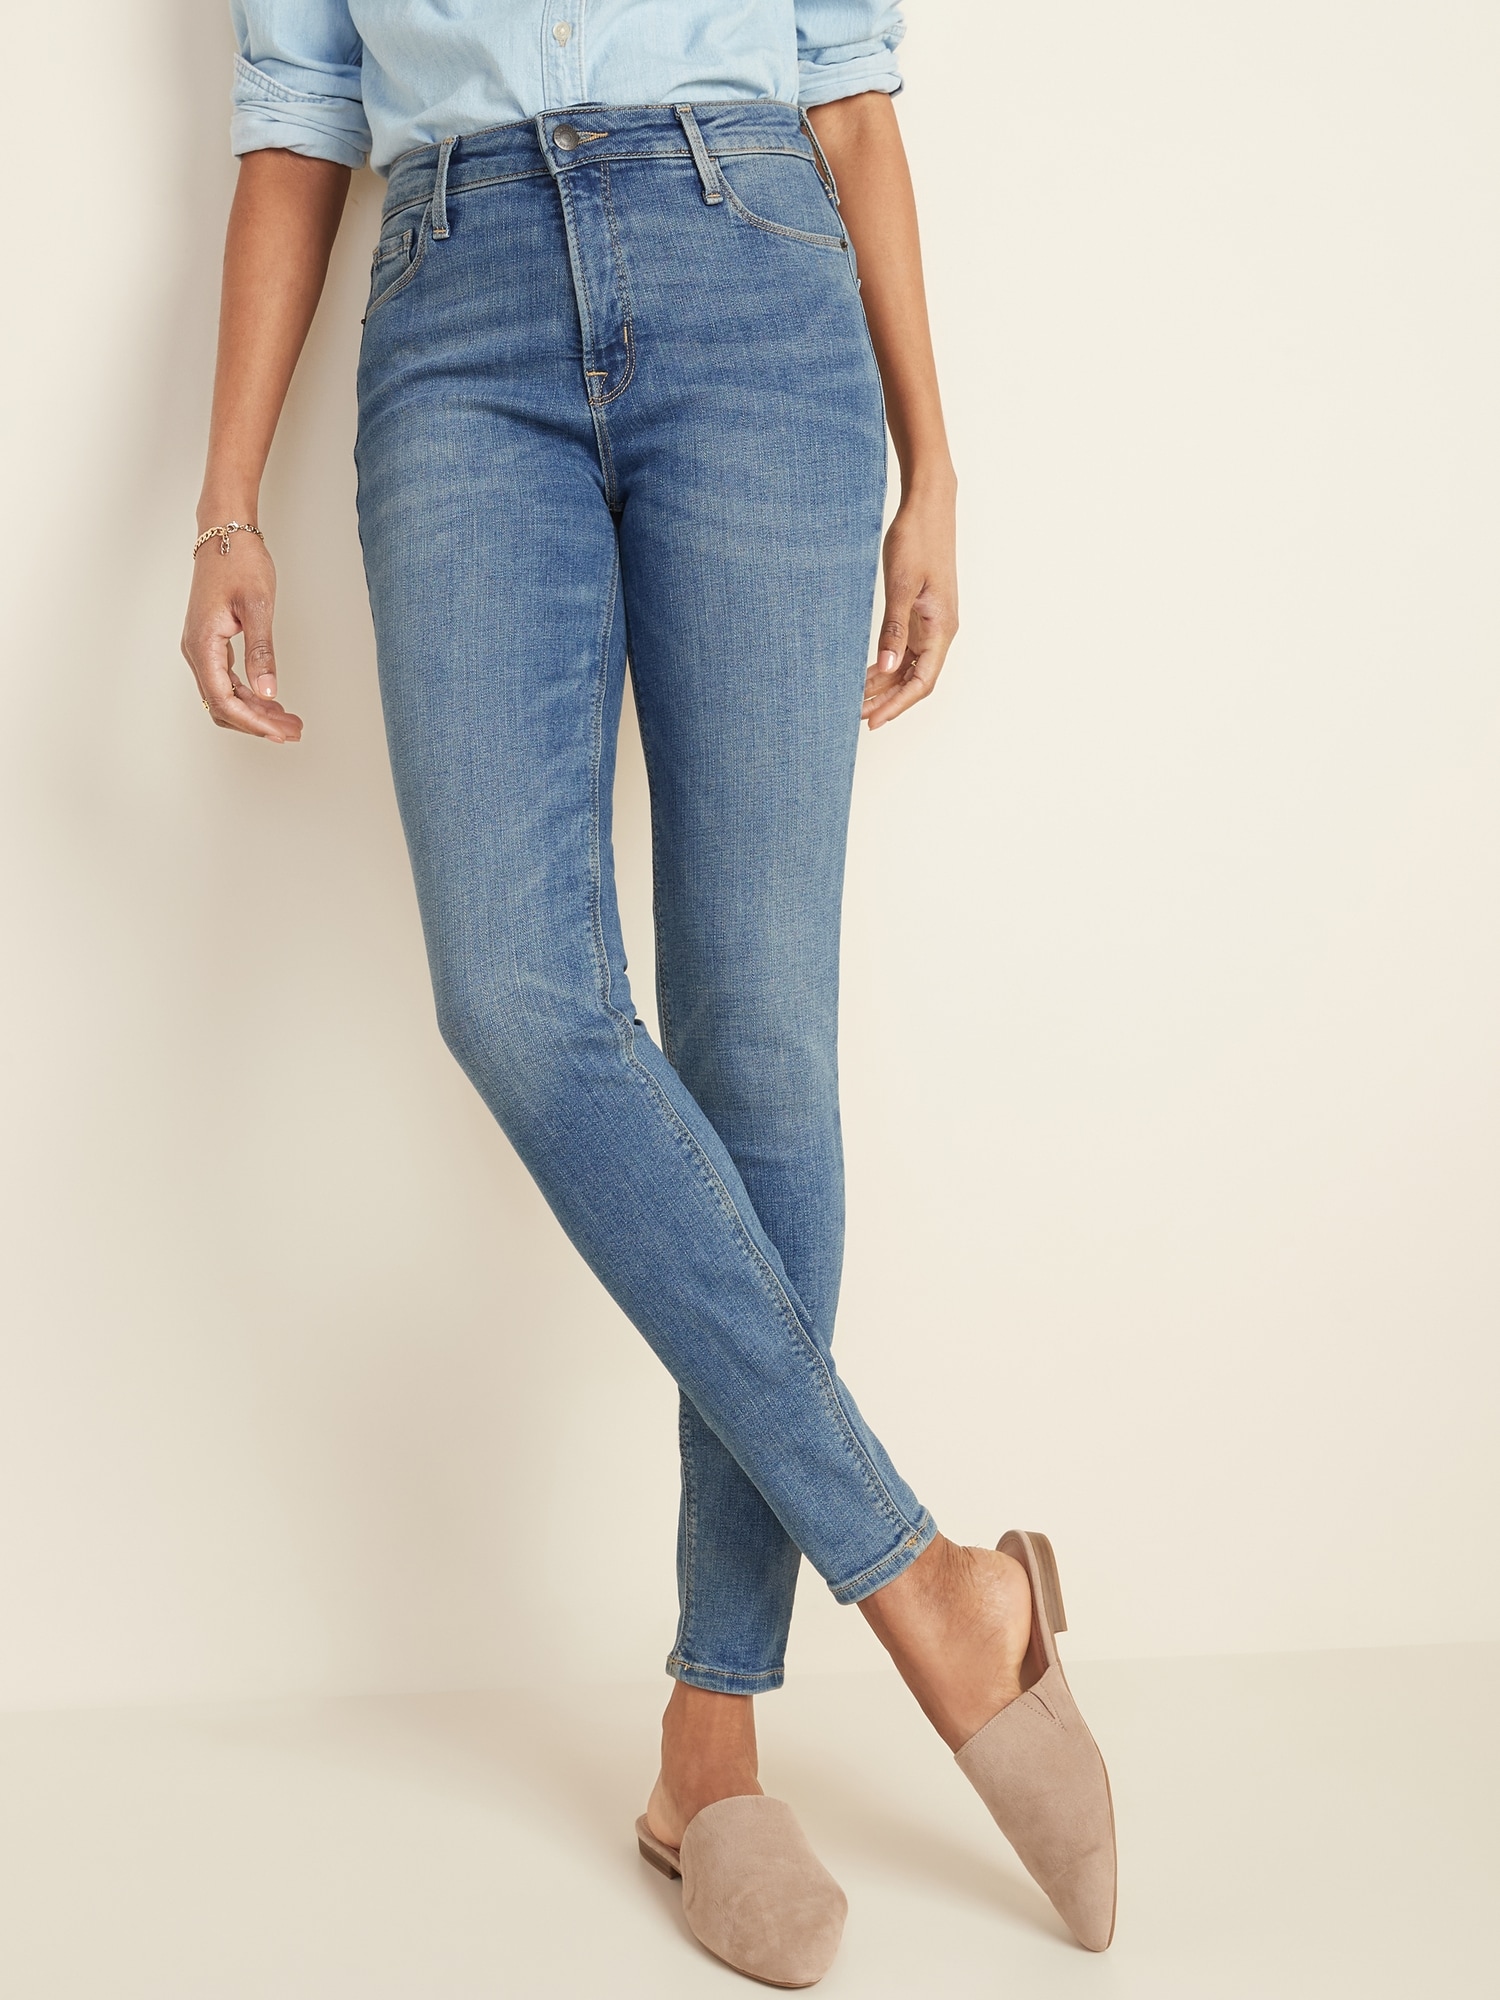 old navy women's high rise jeans